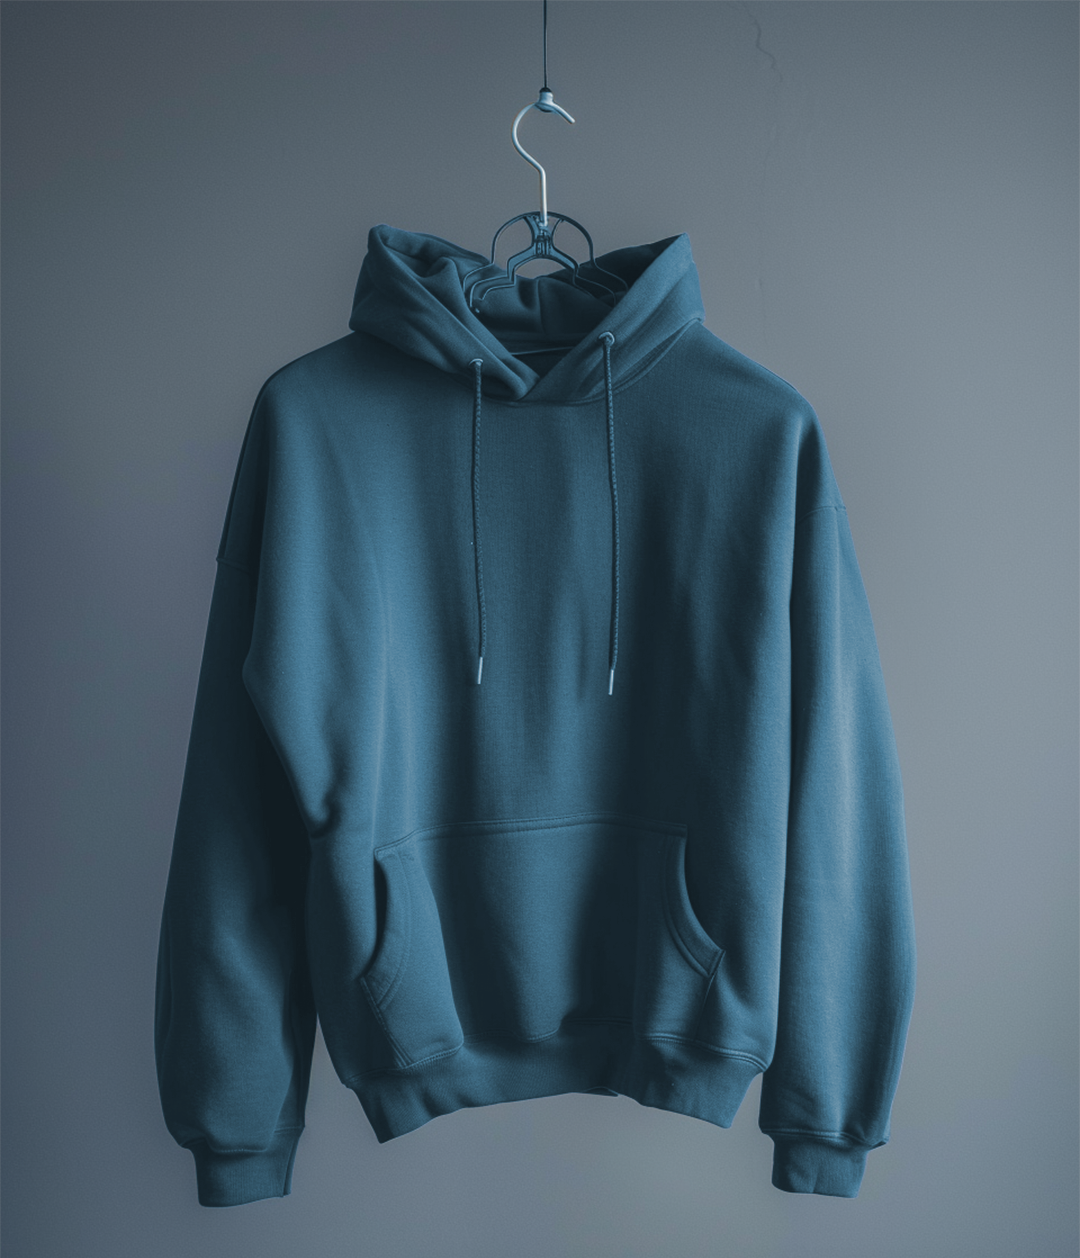 Steel Teal Oversized Hoodie & Lounge Shorts Co-Ords